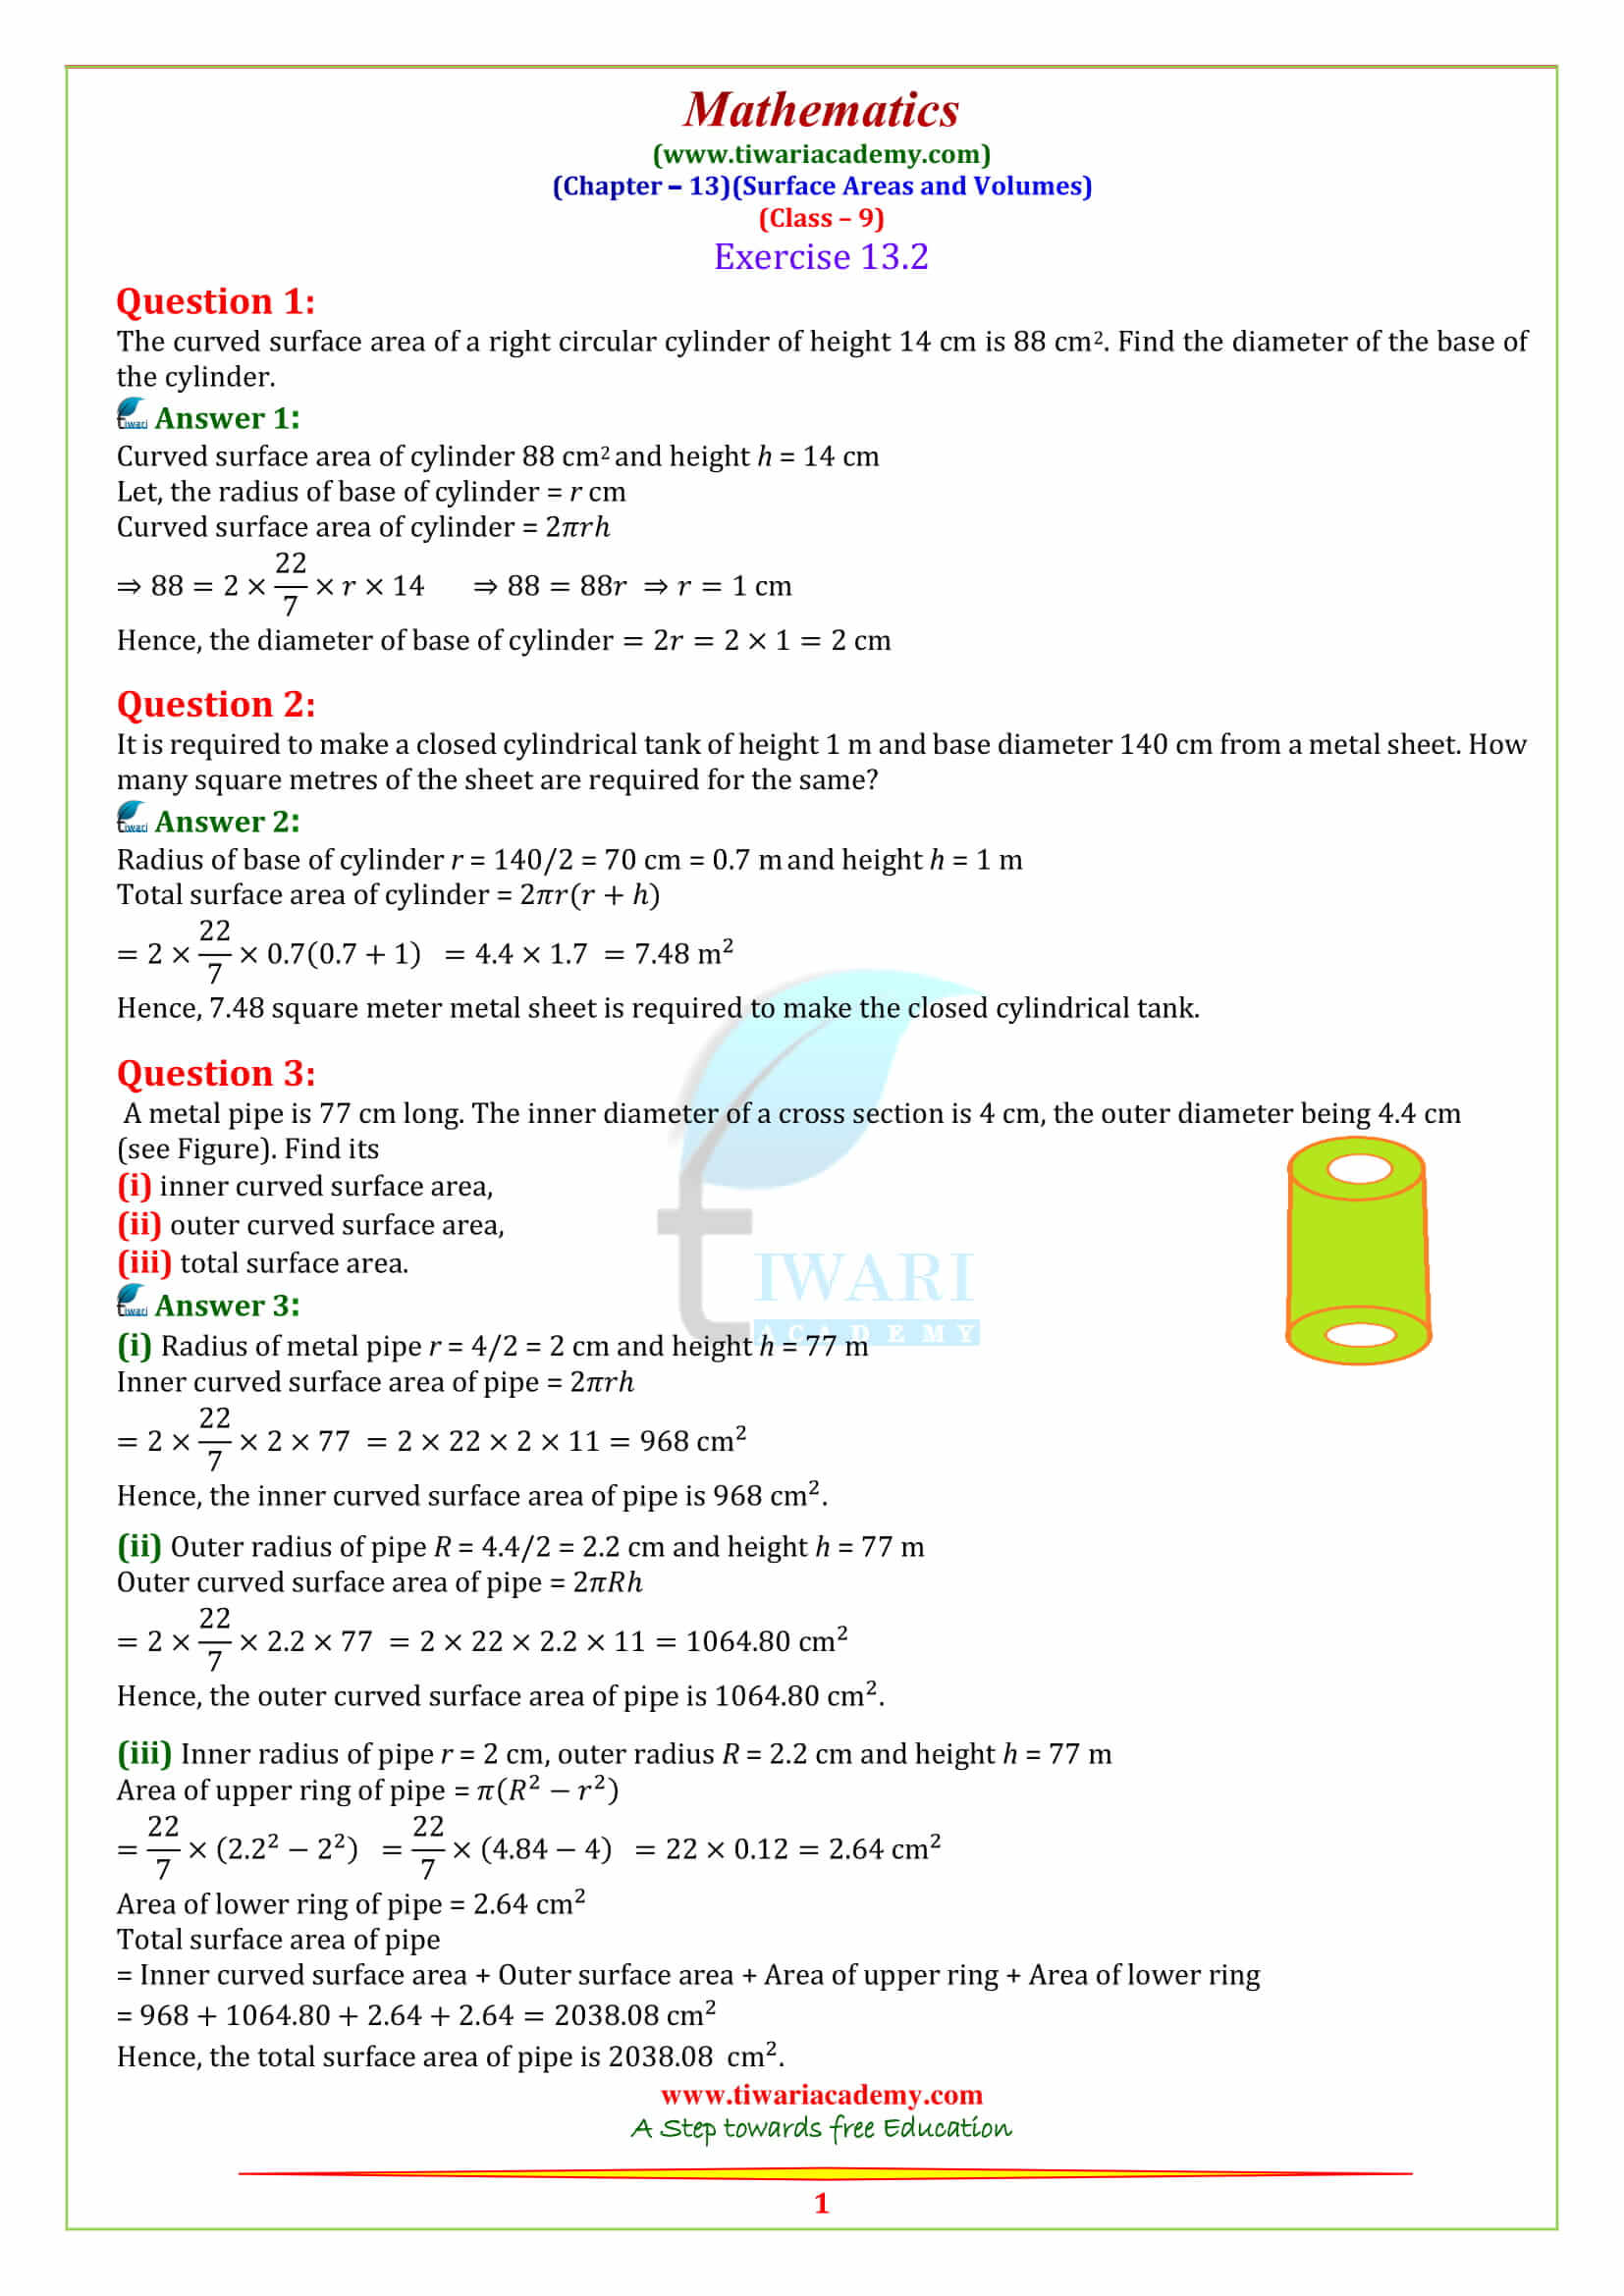 9 Maths Chapter 13 Surface Areas and Volumes Exercise 13.2 sols